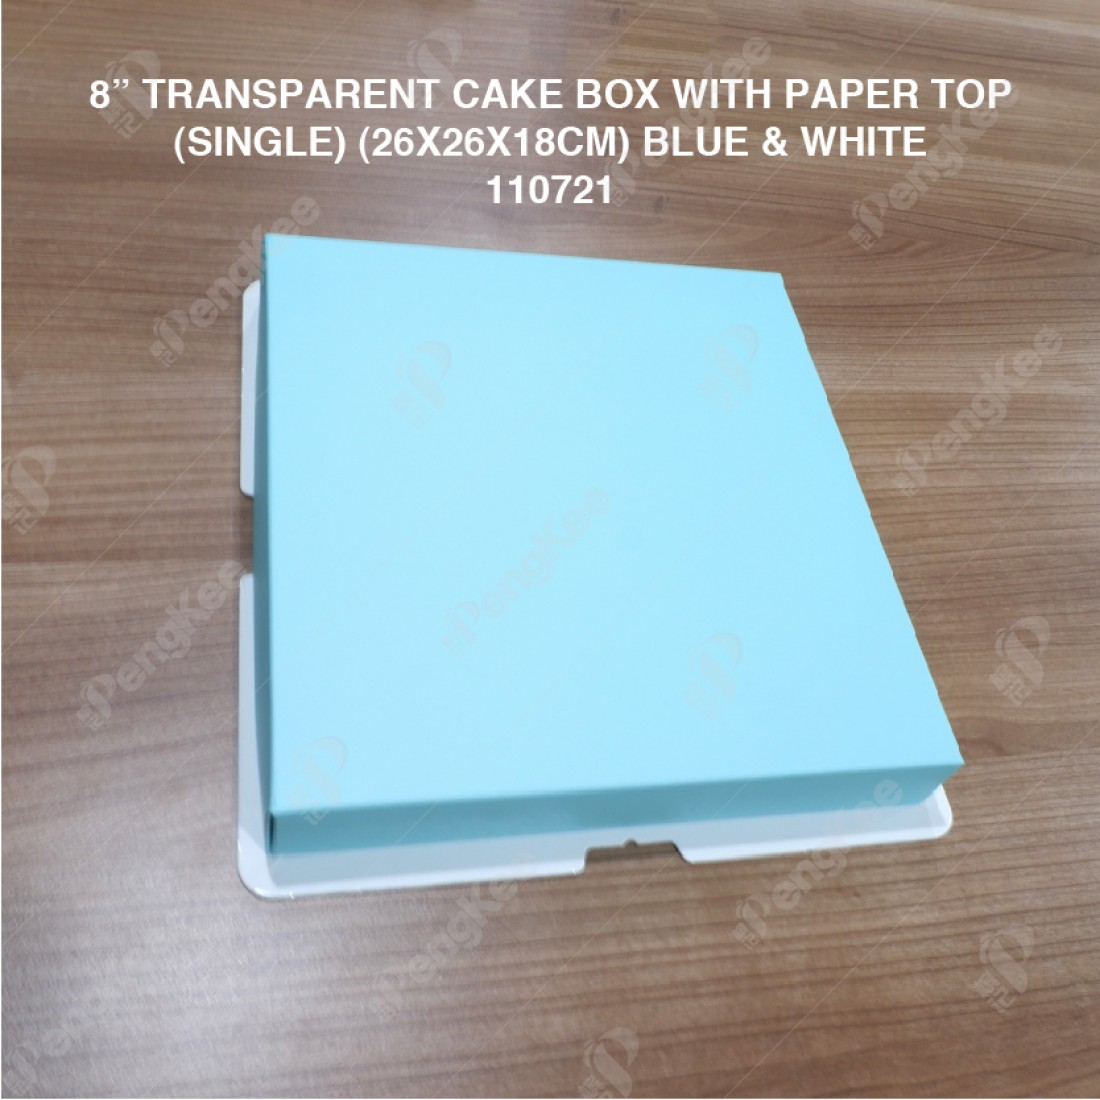 8" TRANSPARENT CAKE BOX WITH PAPER TOP(SINGLE) (26*26*18CM)- BLUE & WHITE